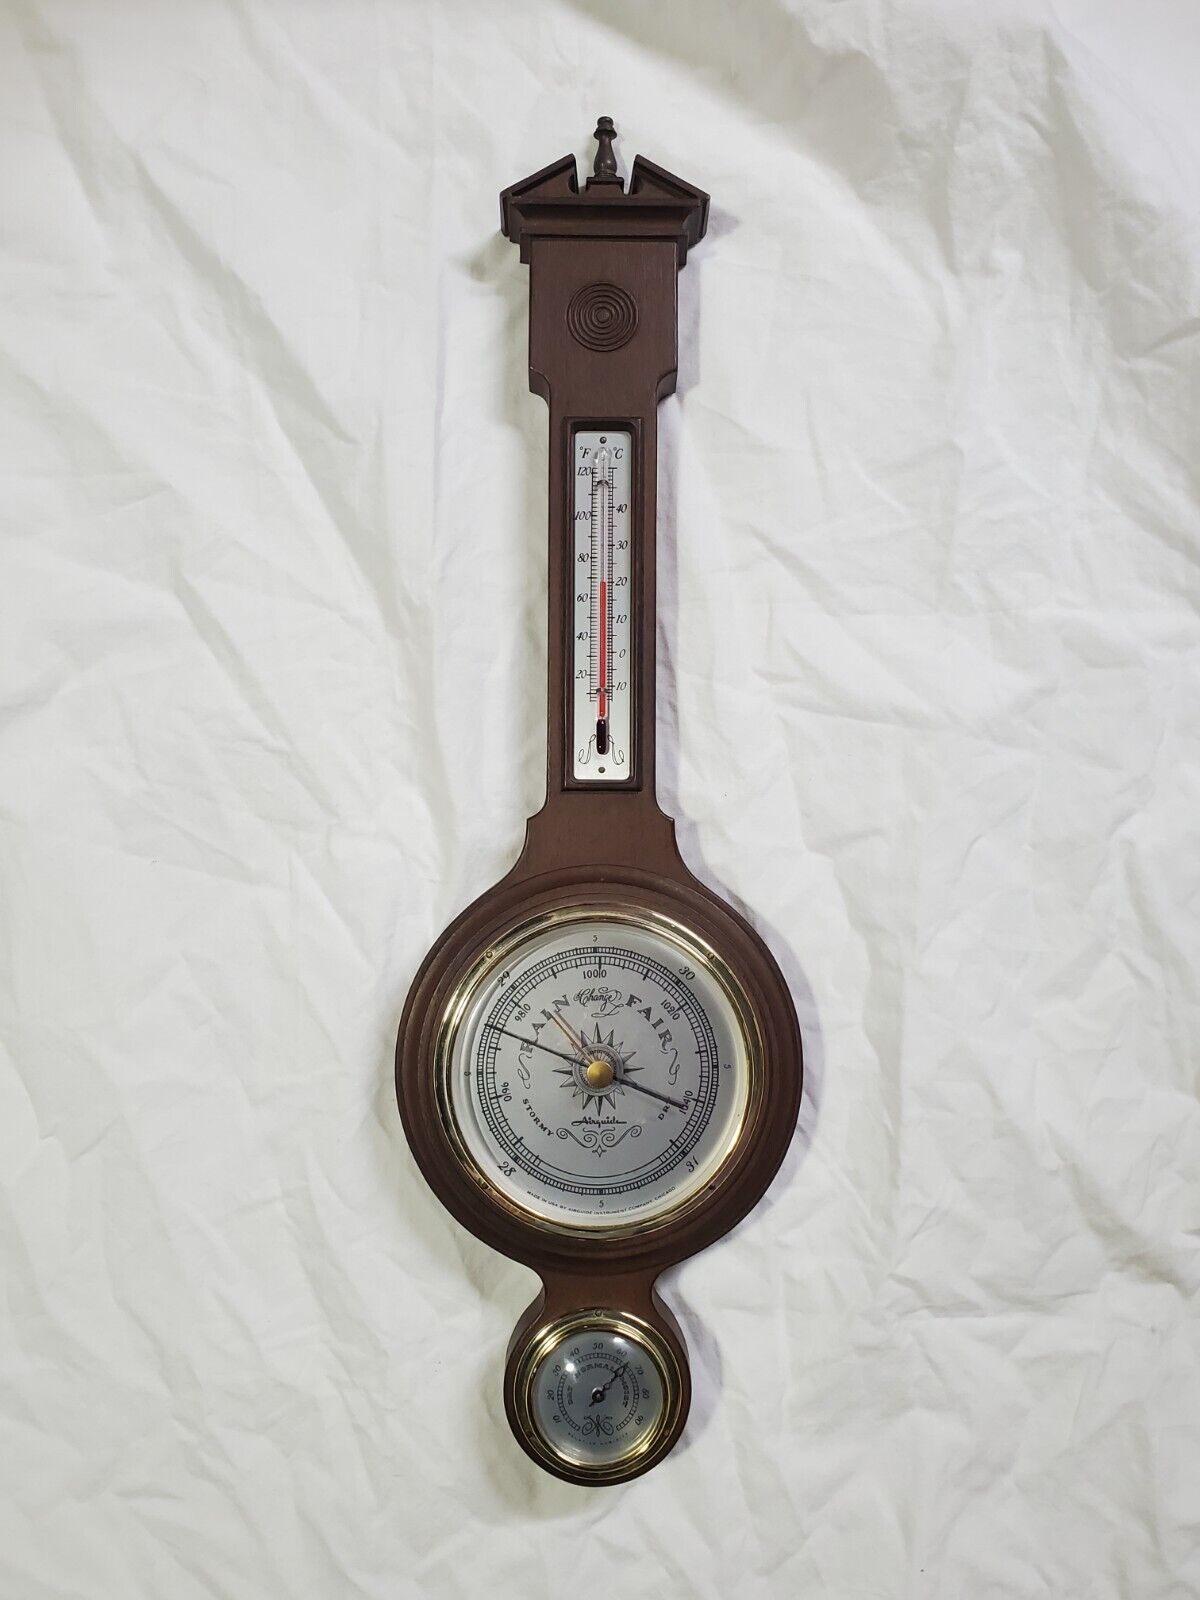 Vintage Airguide Banjo Barometer, Thermometer, Humidity Guage -- WORKS